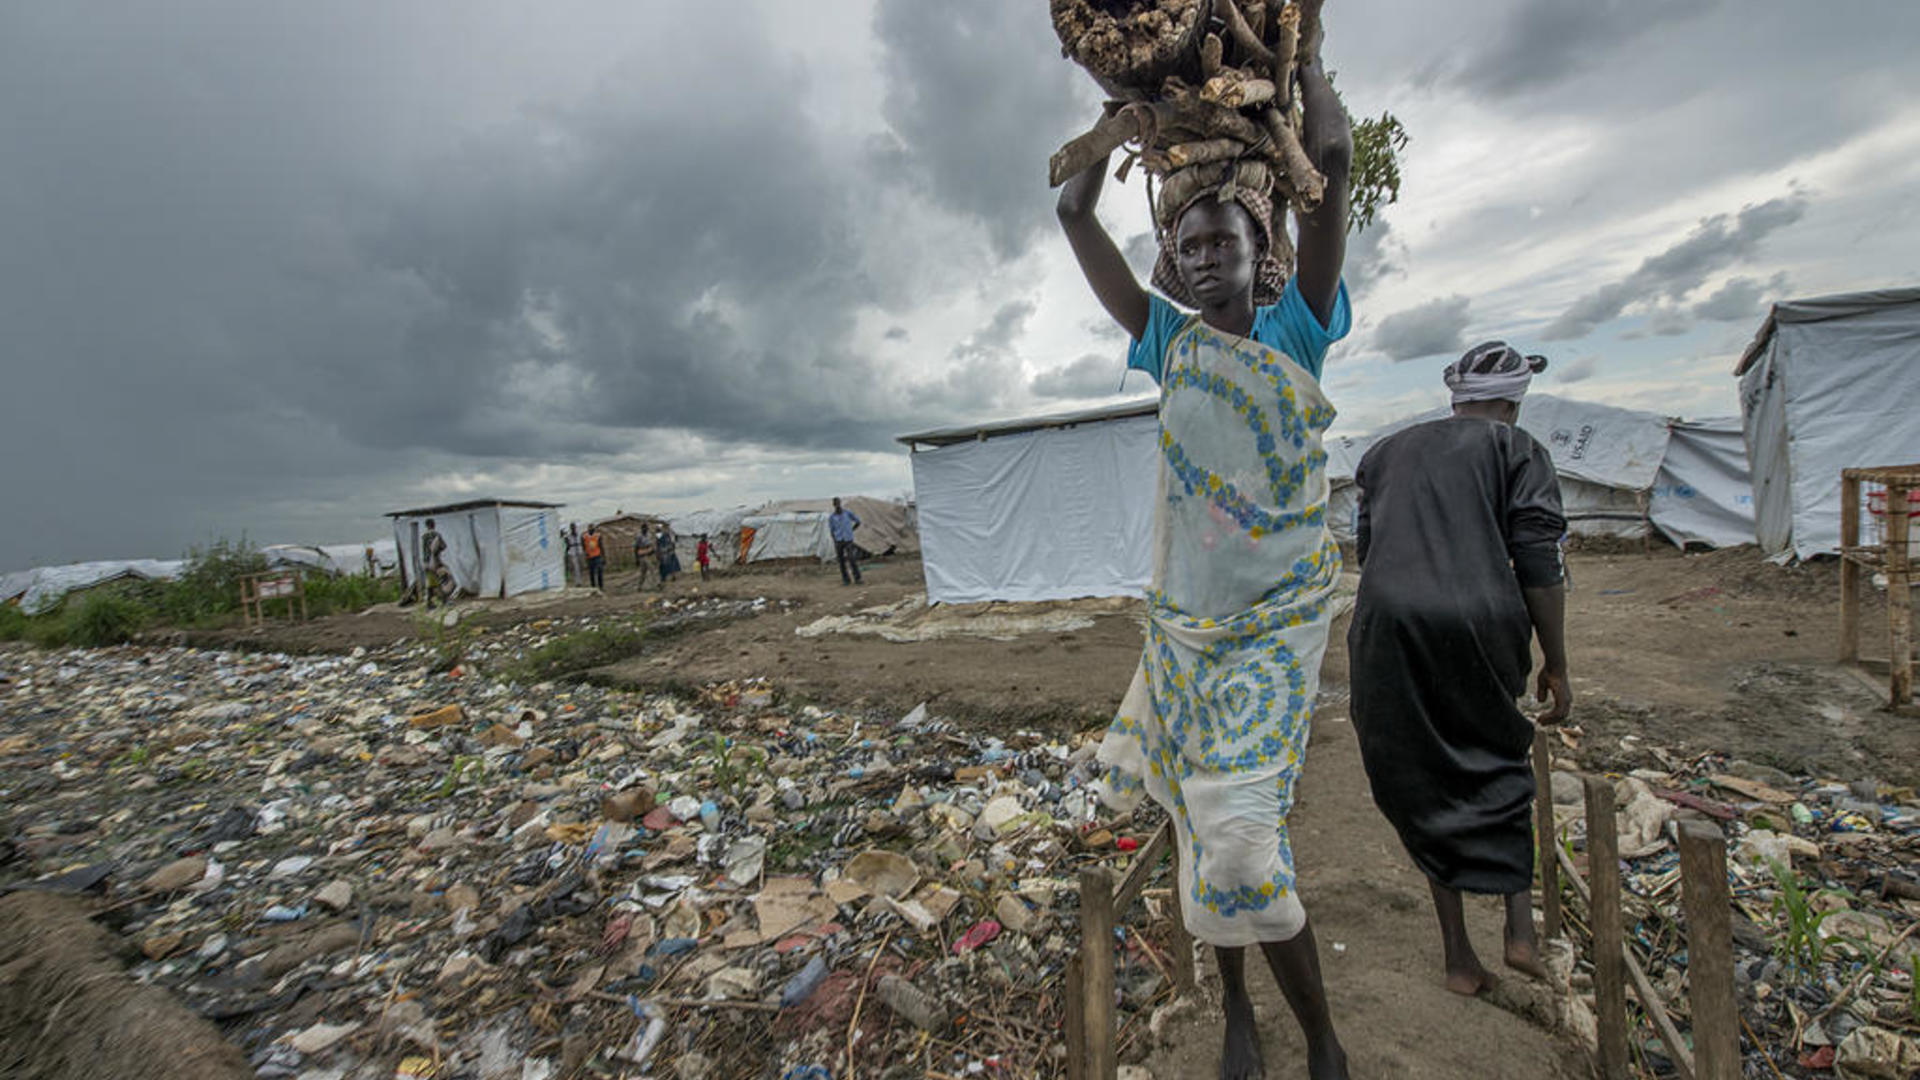 A woman carries firewood on her head in a camp for displaced people in South Sudan